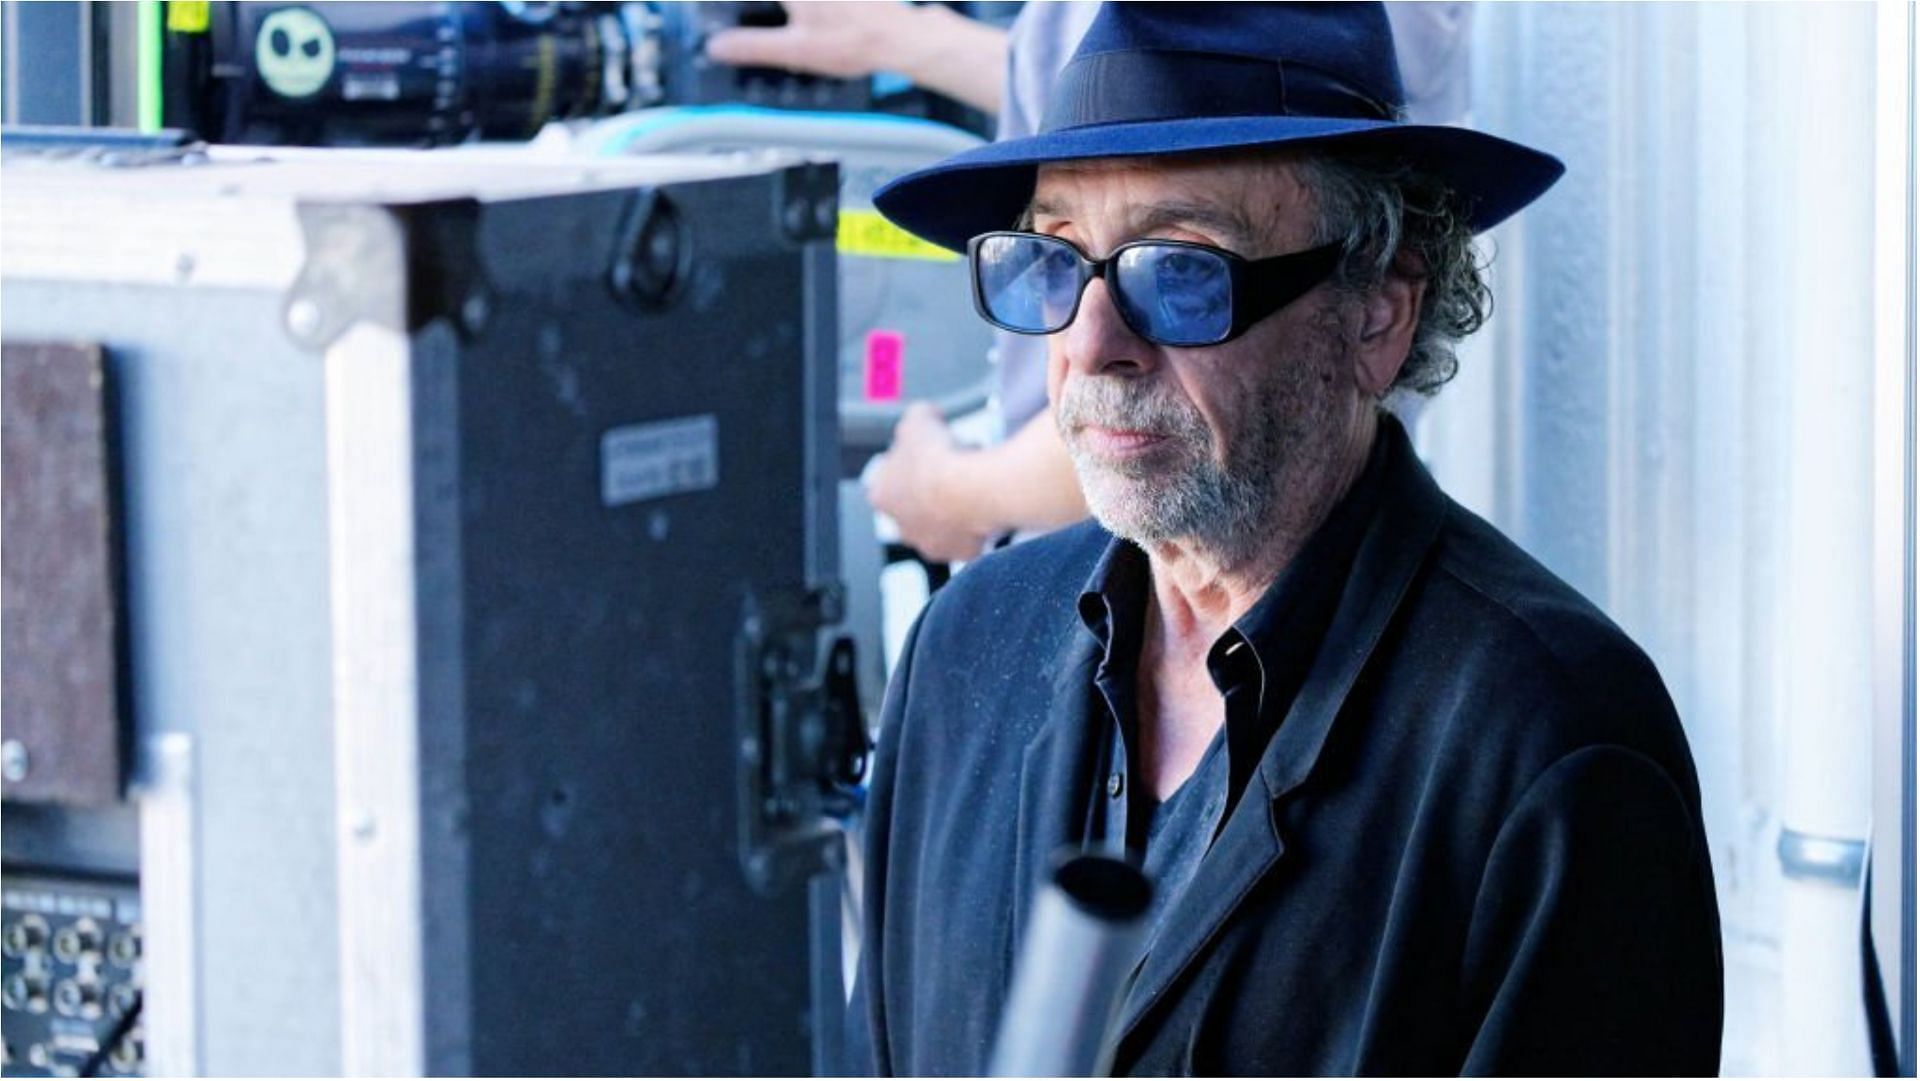 Tim Burton said that he is not making any more movies for Disney (Image via Sylvain Lefevre/Getty Images)